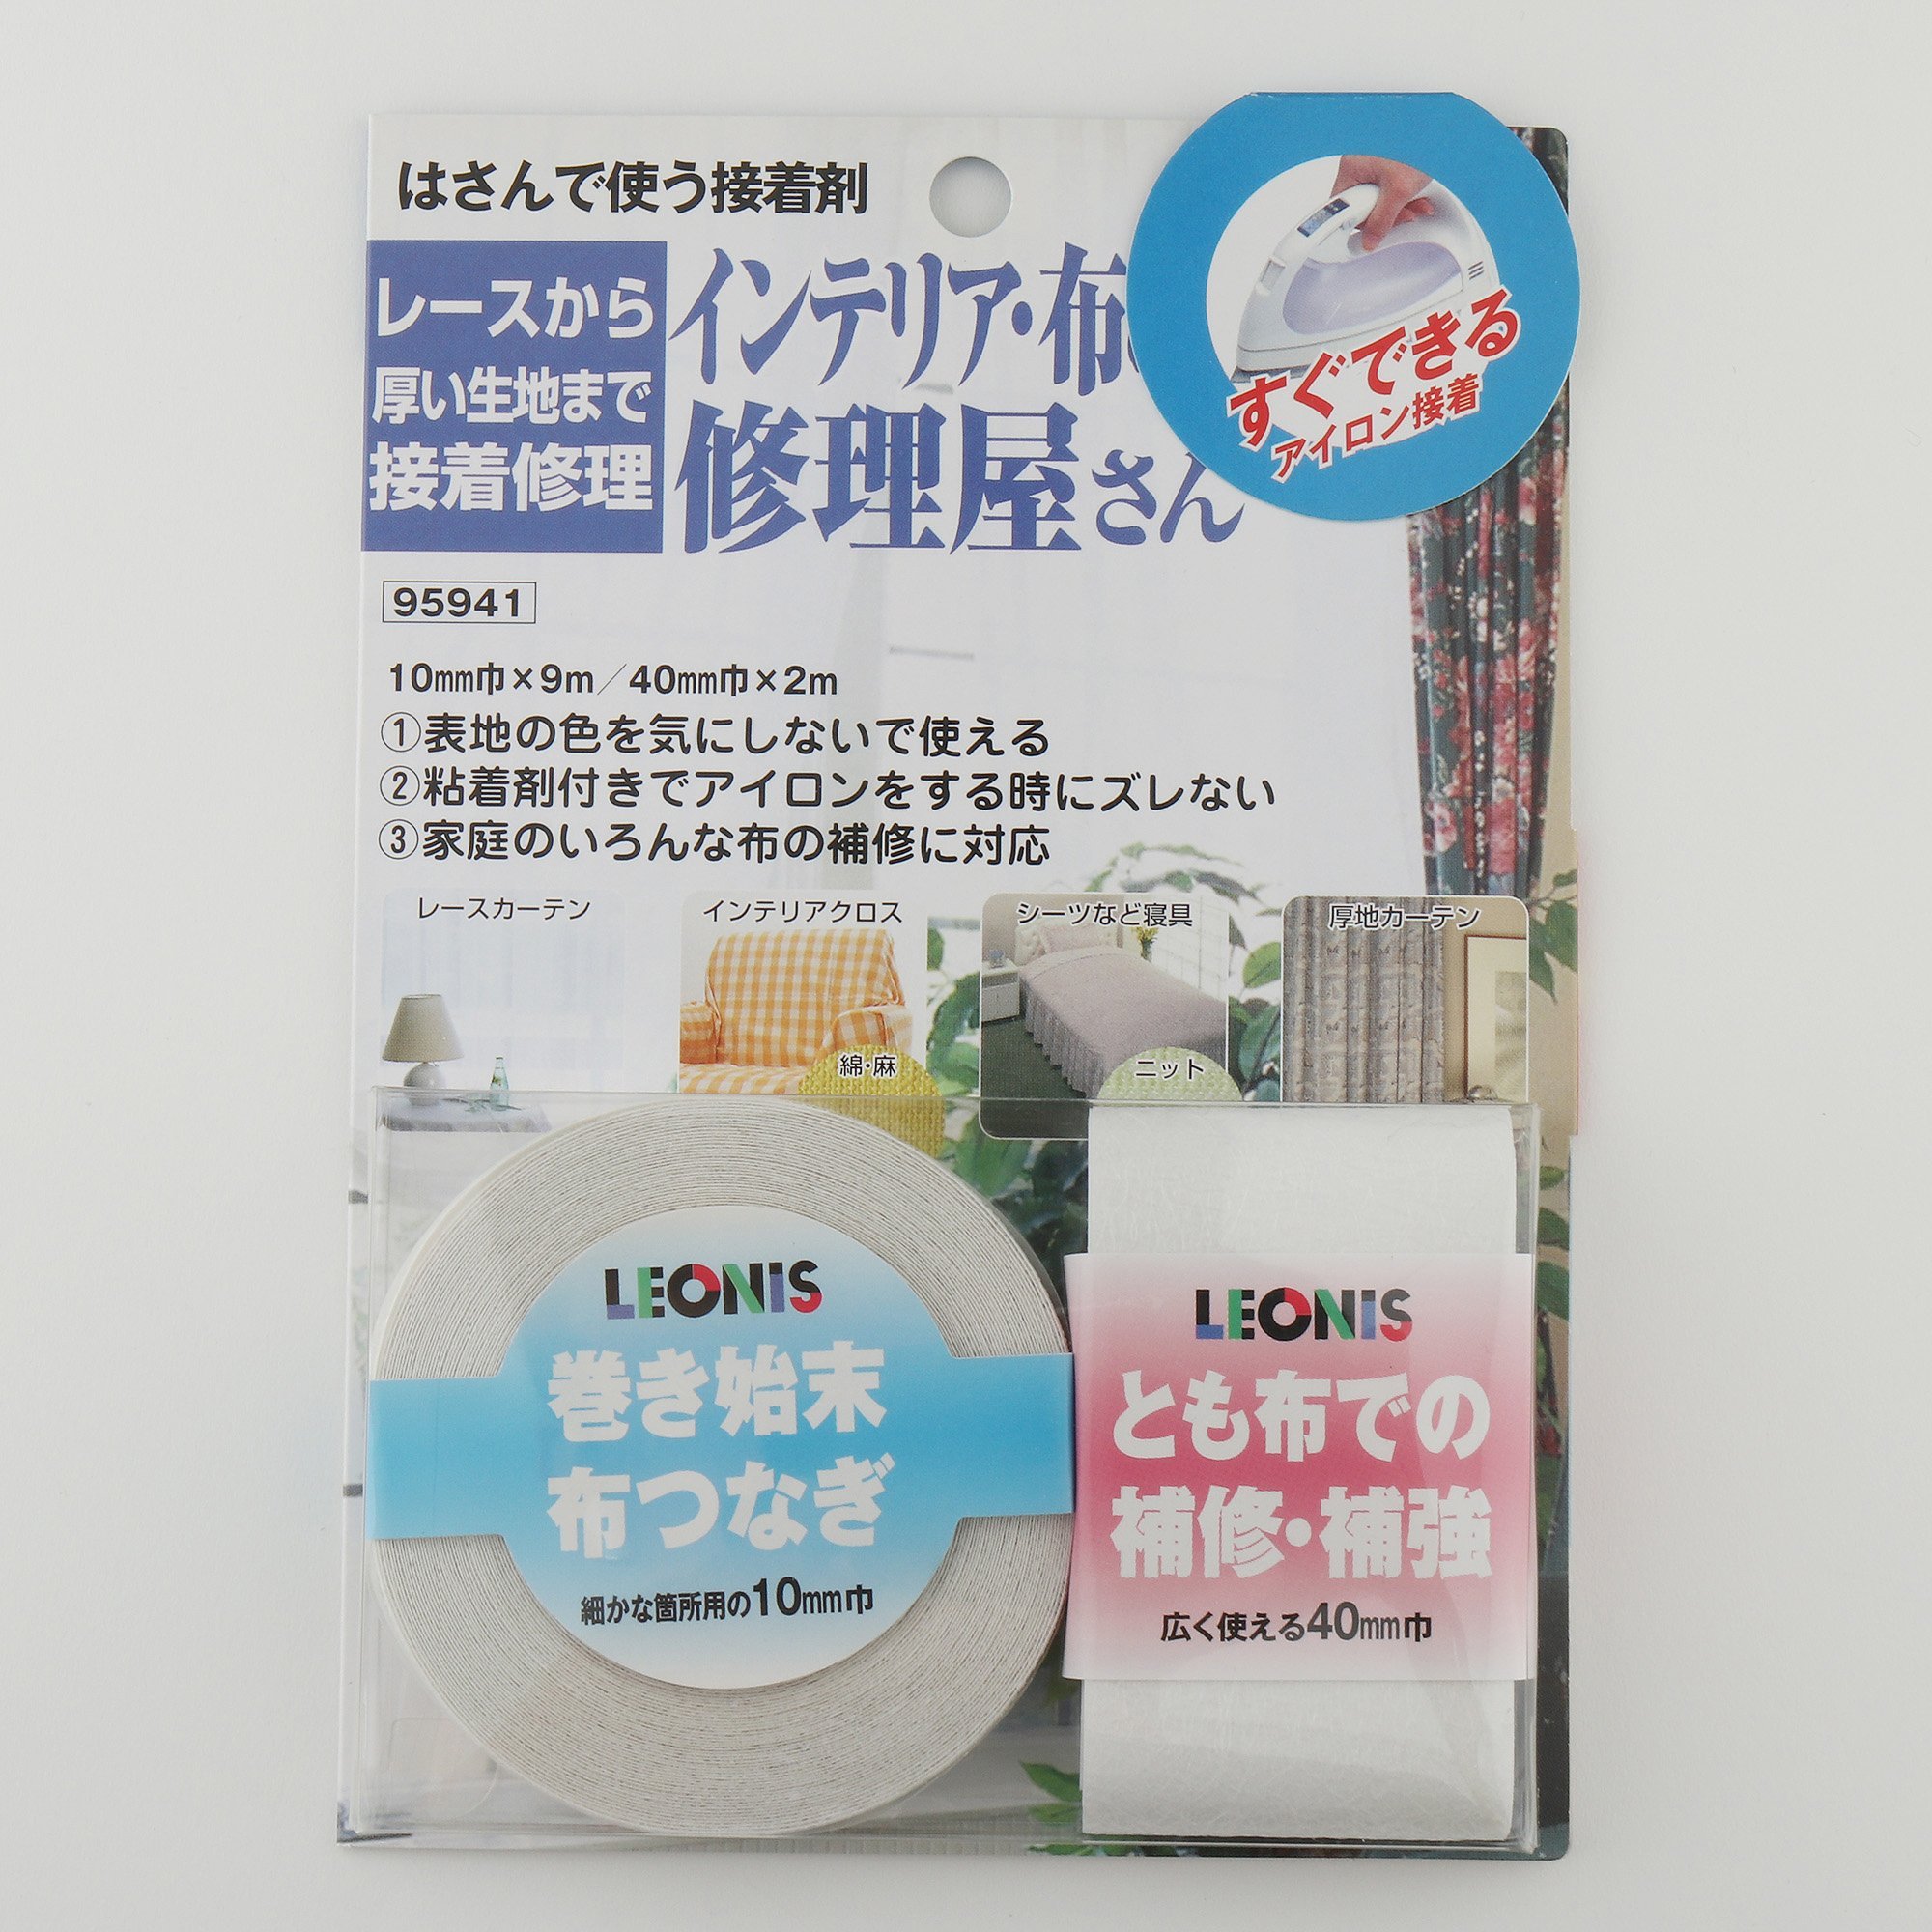 Iron-On Mending Fabric Tape for Interior 9m&2m